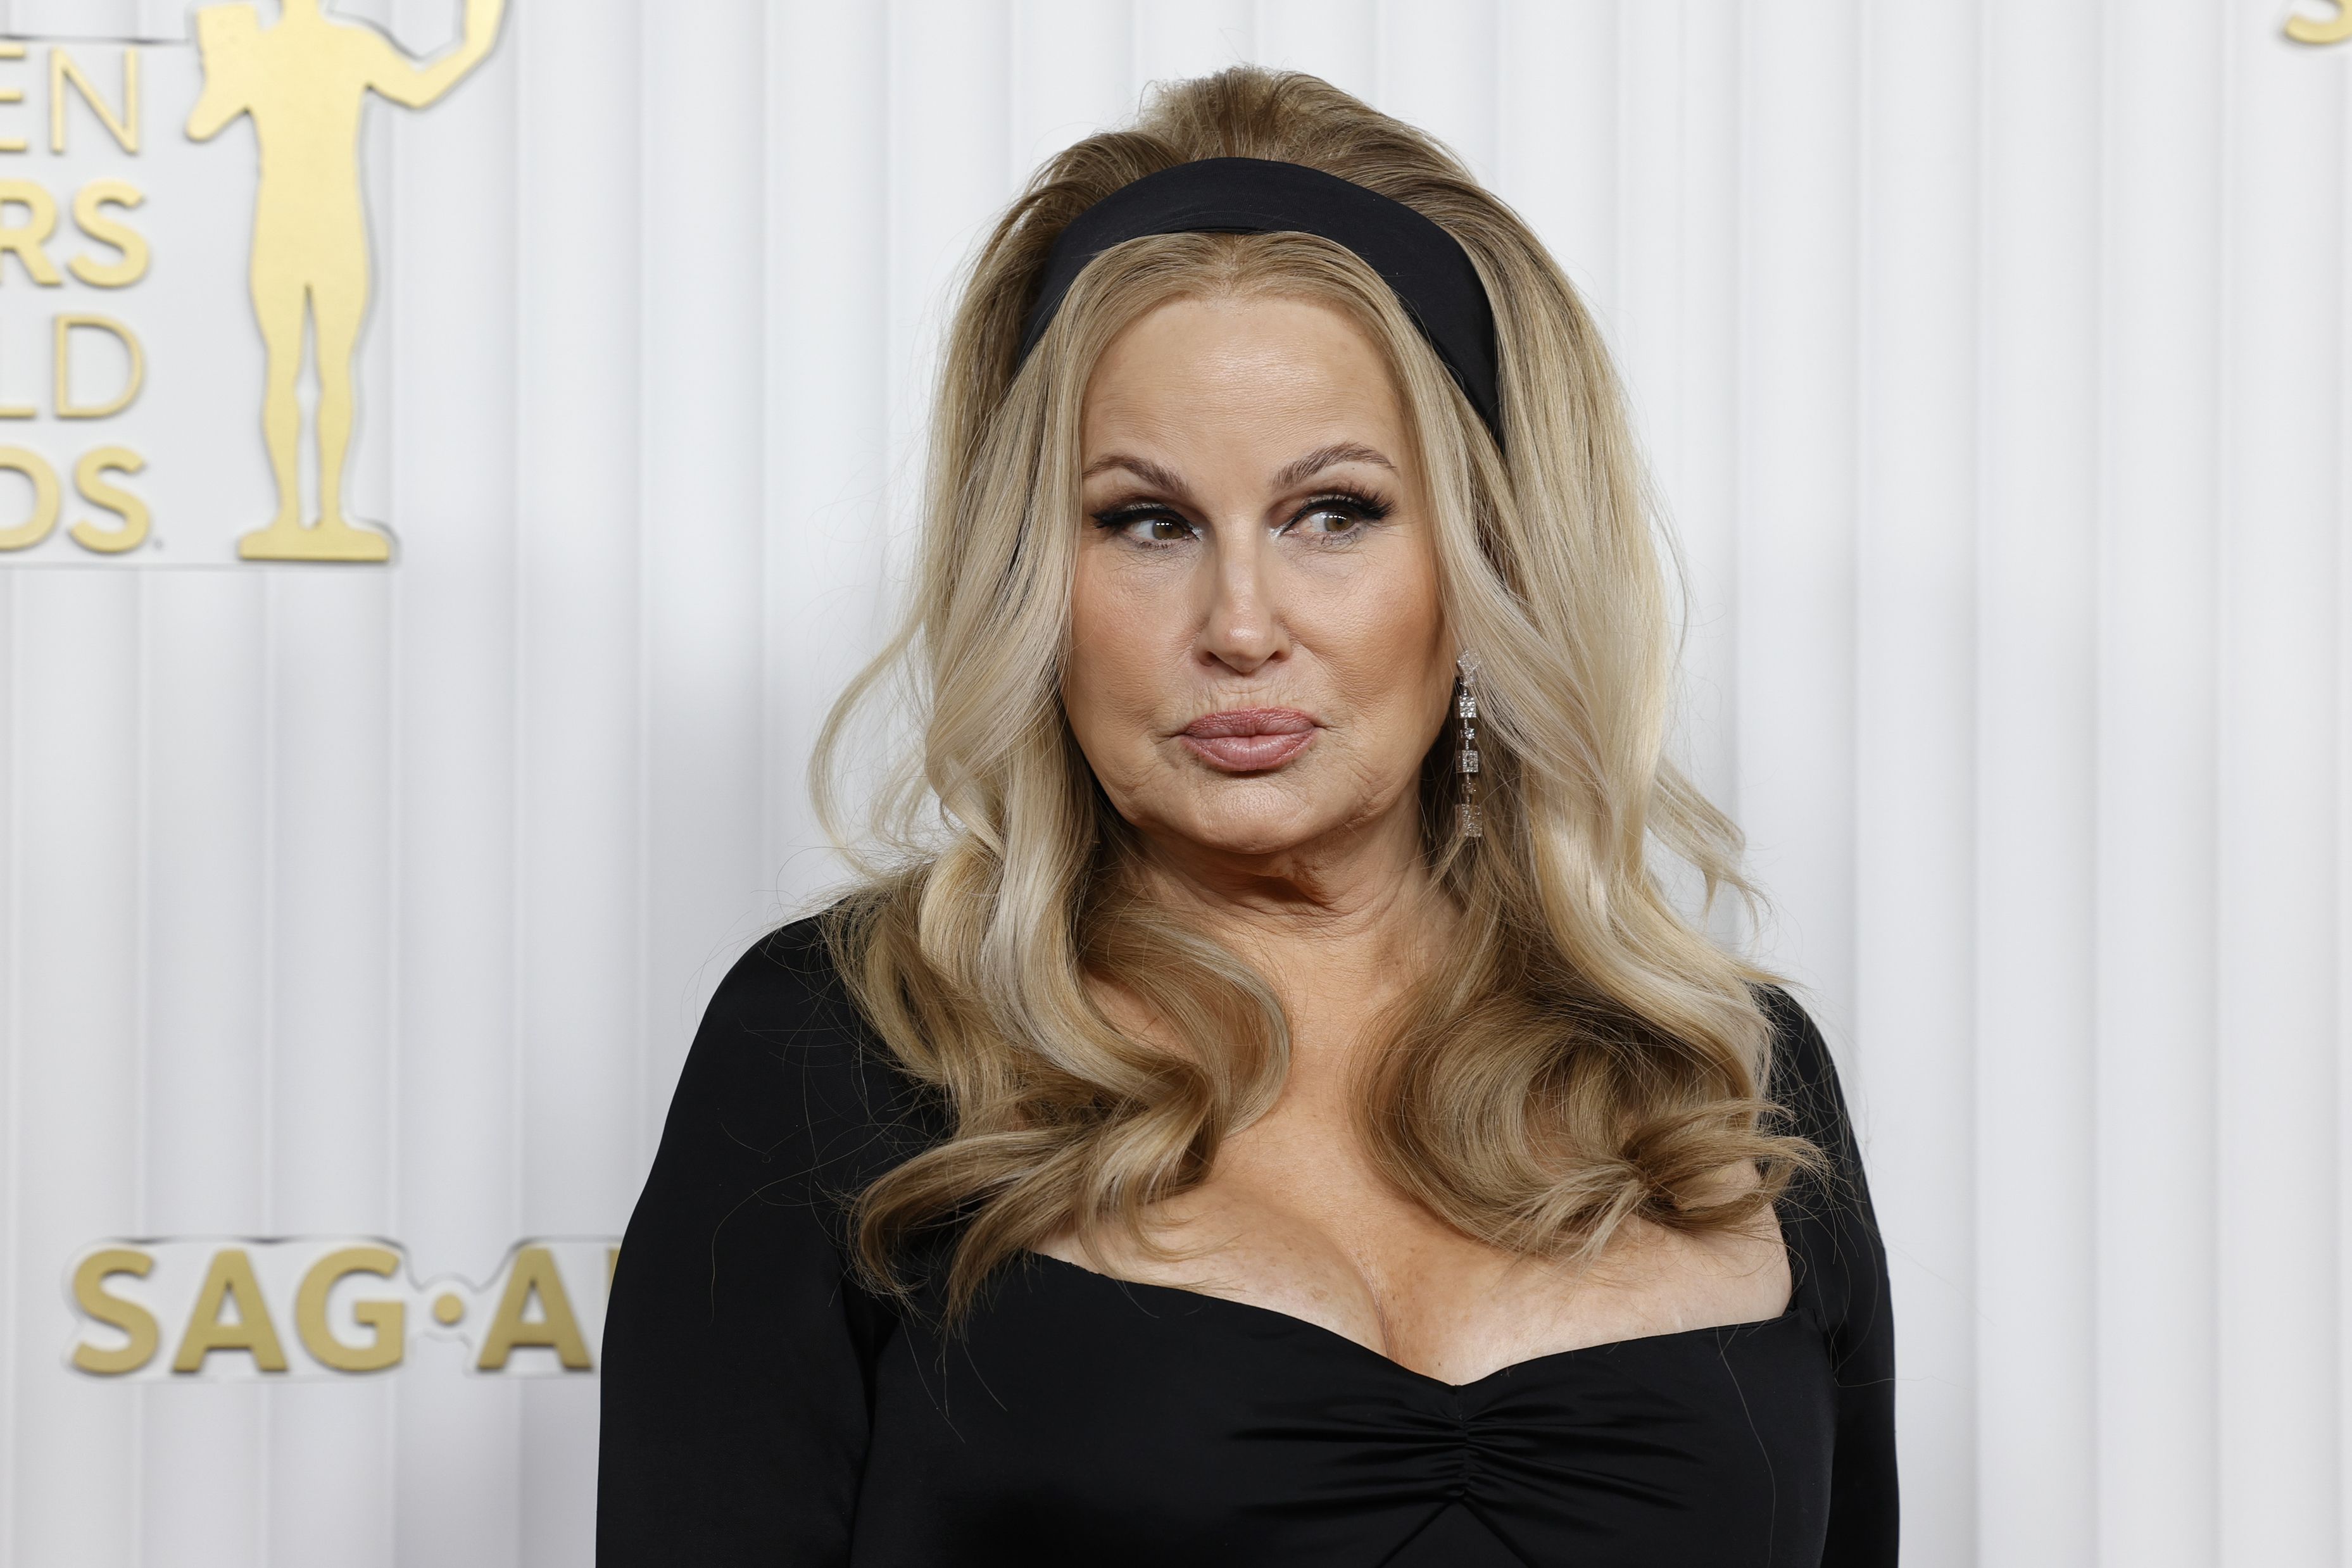 Jennifer Coolidge is taking us back to the 60s with this bouffant